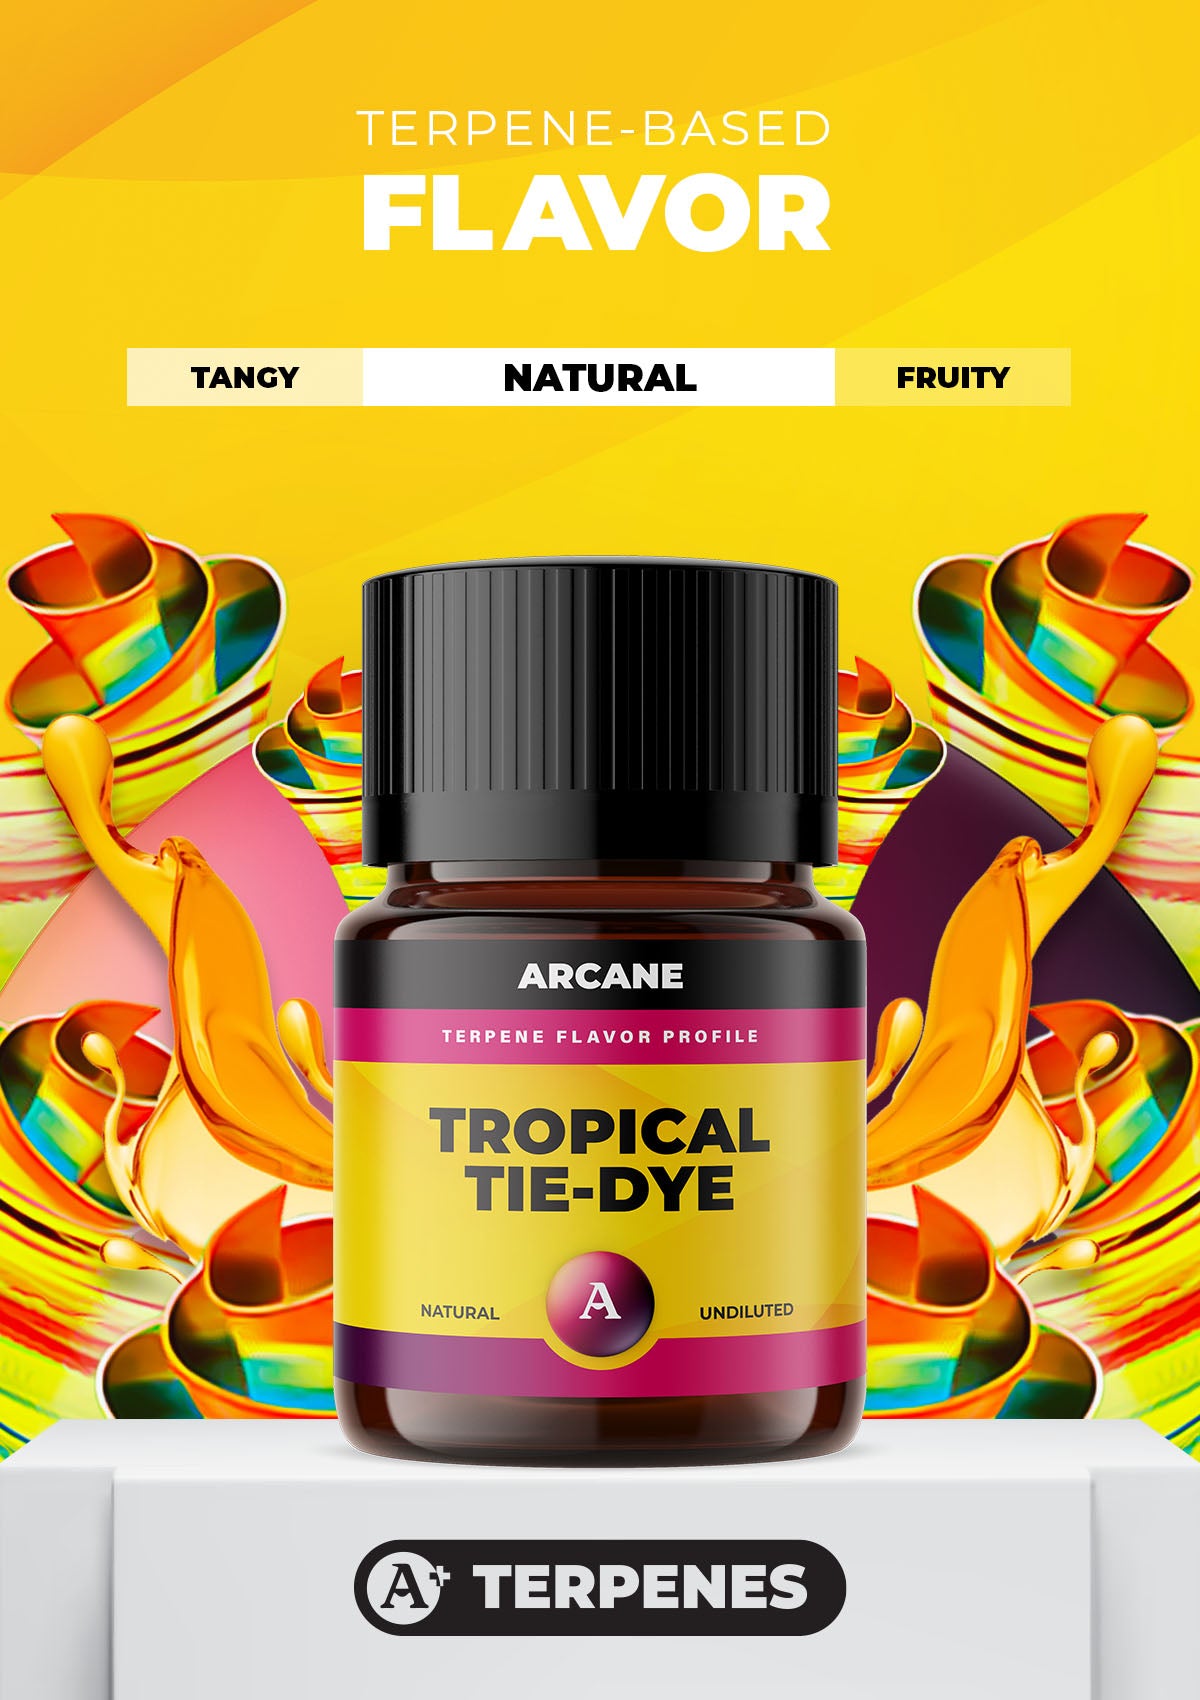 Arcane Aromatics All-Natural Botanical Terpene Flavors. Tropical Tie-Dye: Sweet and tangy soft tropical rolled into one. PRIMARY TERPENES: Limonene, Caryophyllene, Myrcene and Linalool.